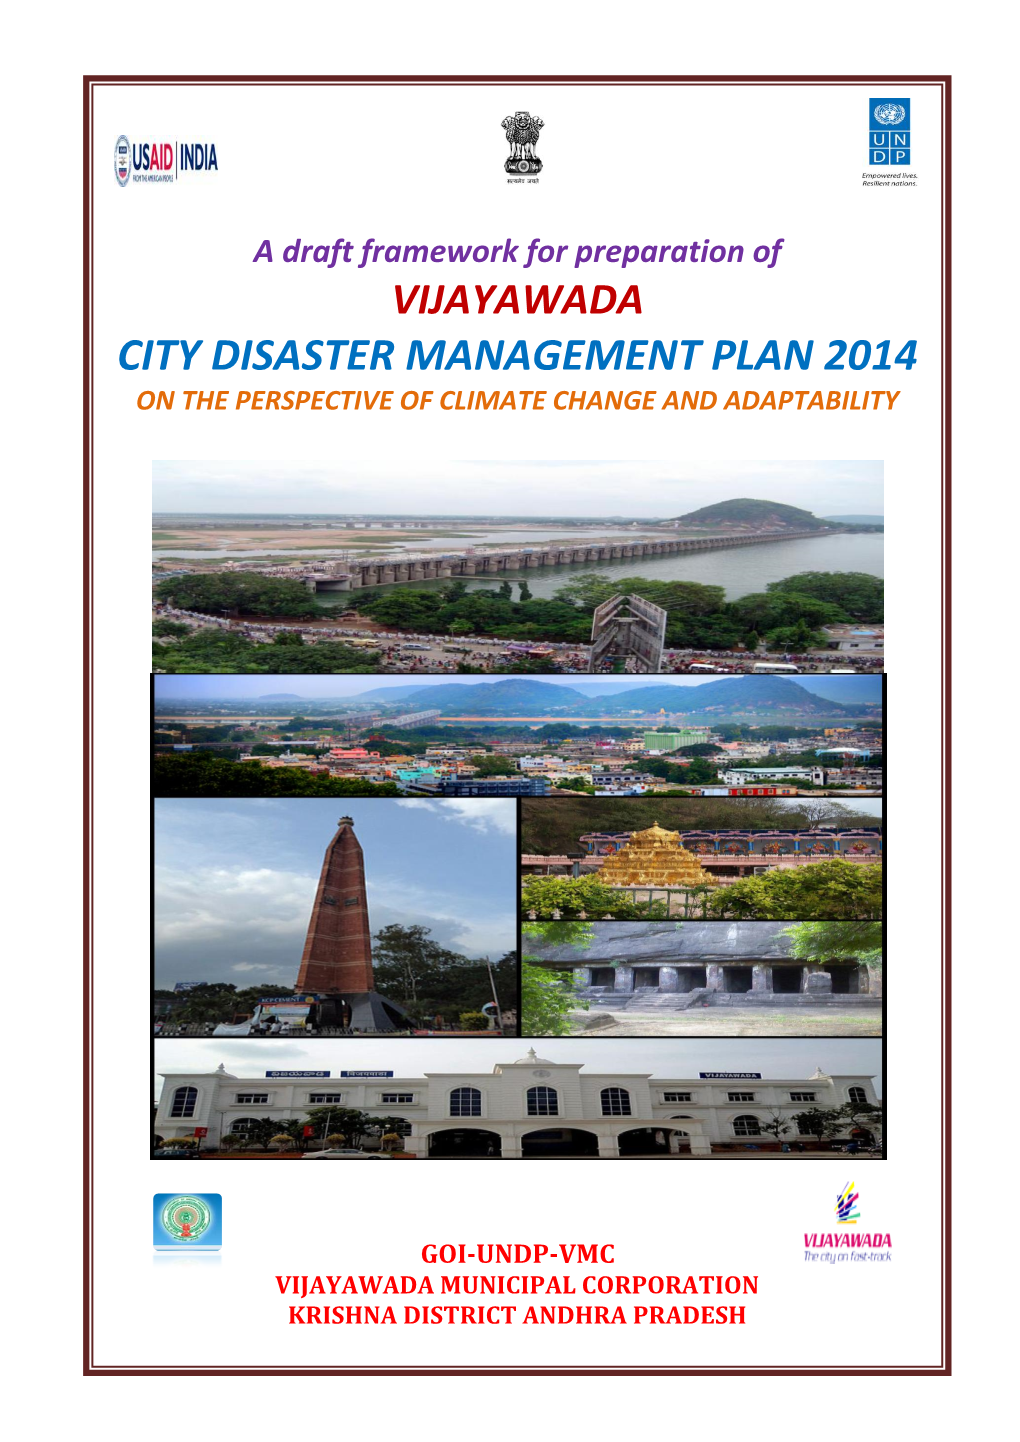 City Disaster Management Plan 2014 on the Perspective of Climate Change and Adaptability